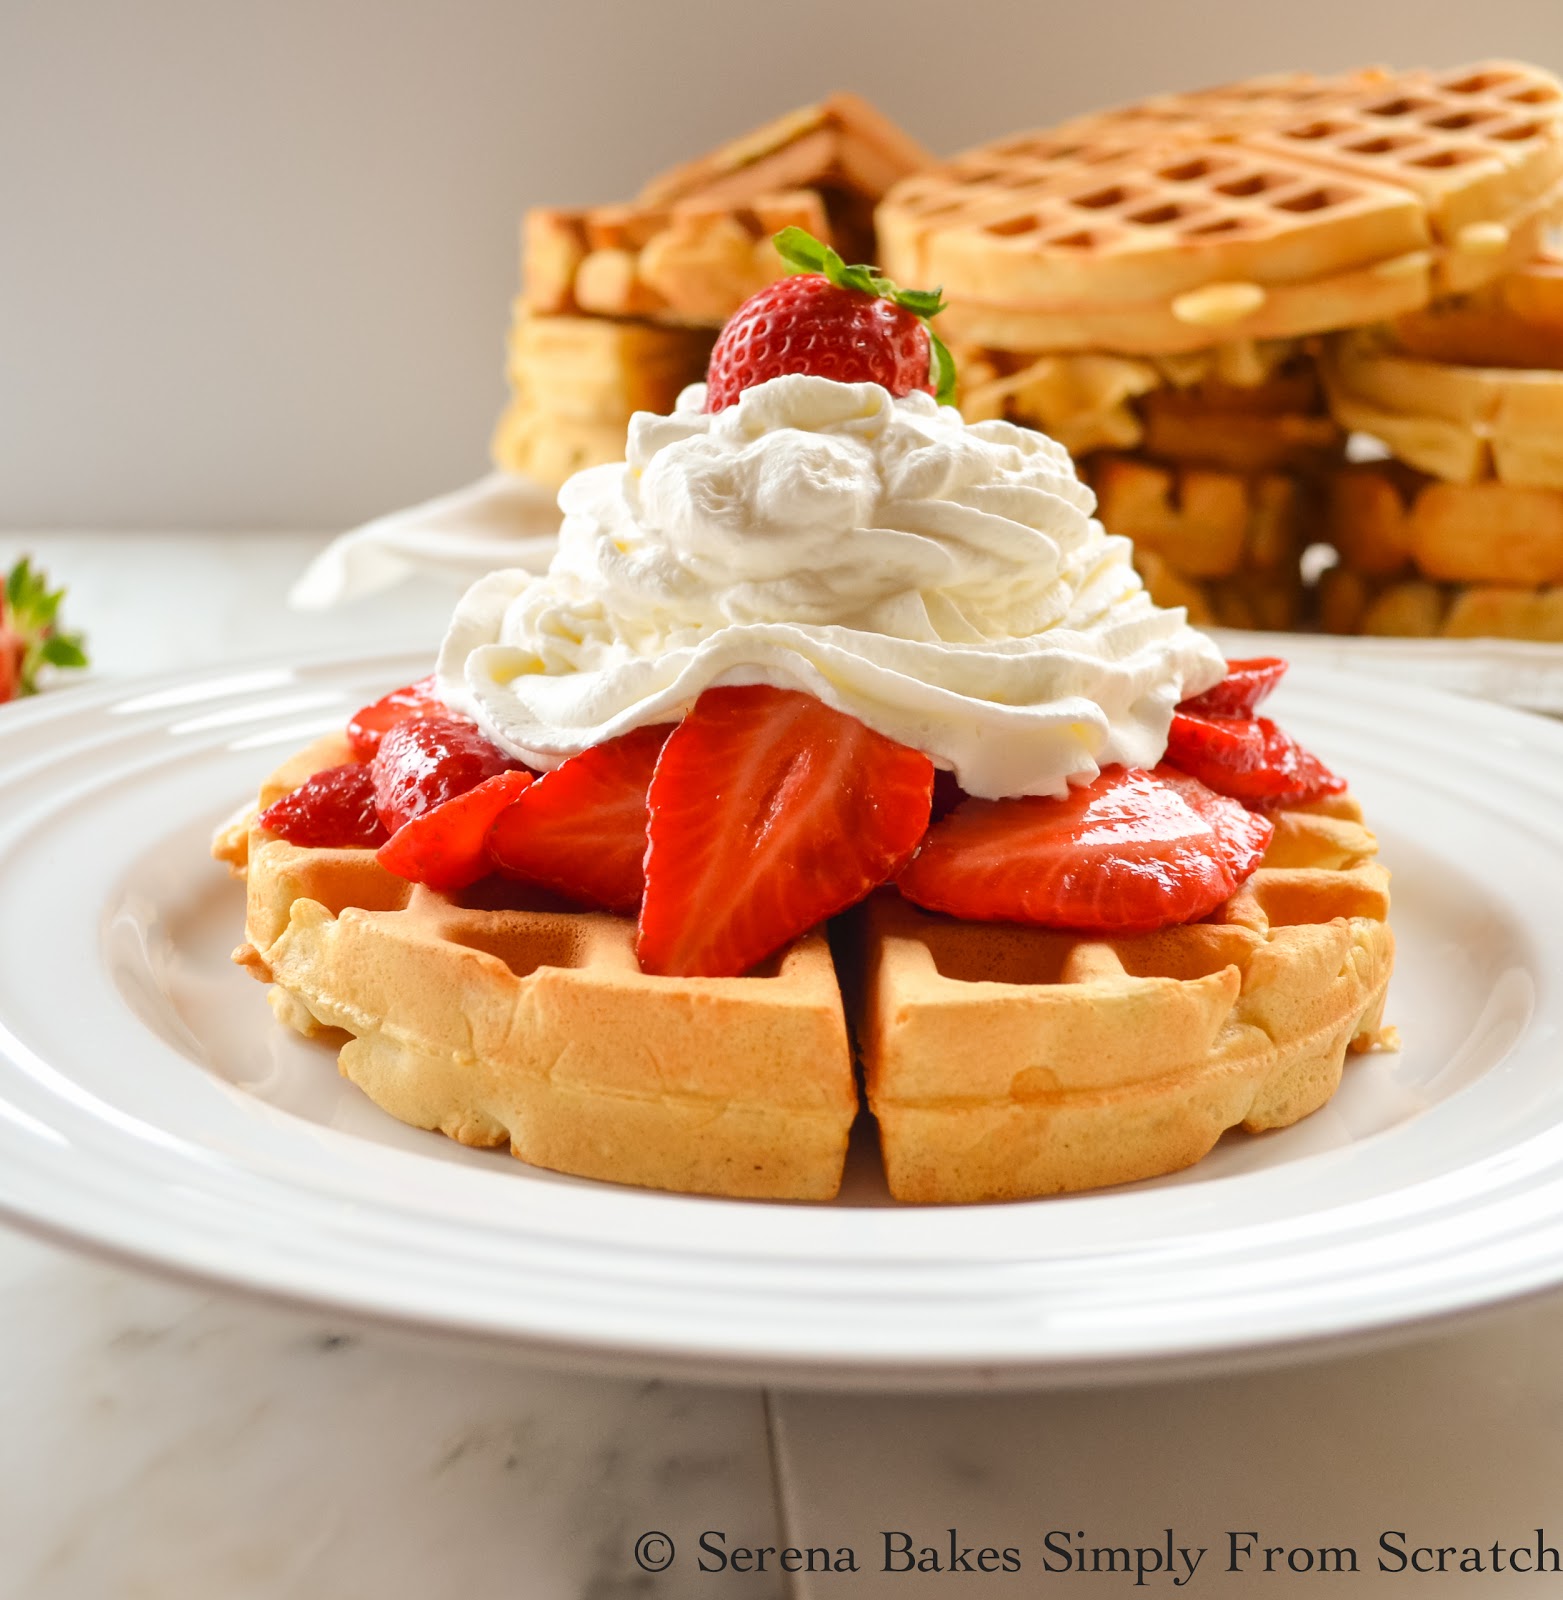 All 103+ Images waffles with strawberries and whipped cream Full HD, 2k, 4k